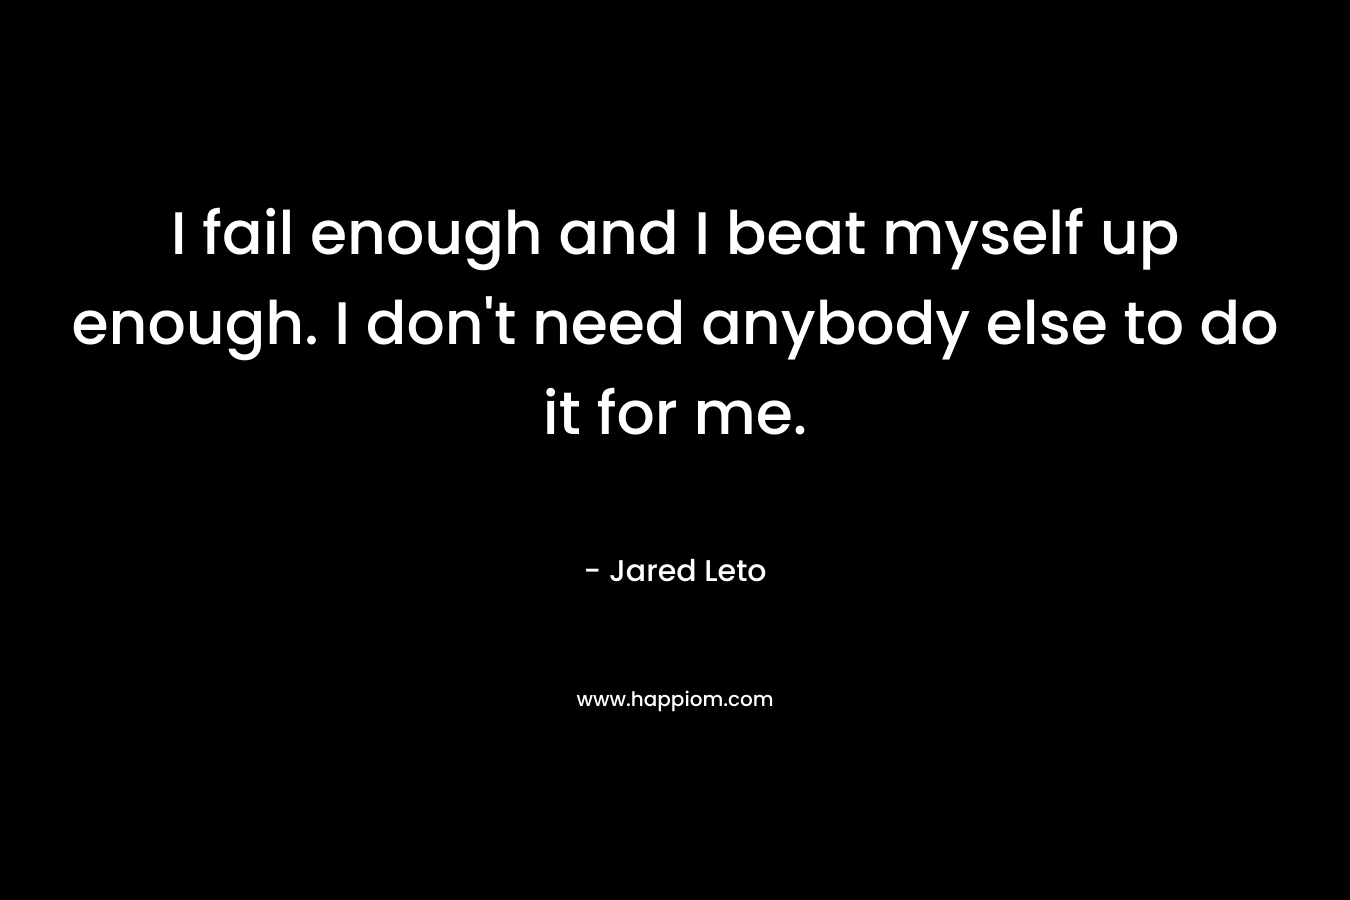 I fail enough and I beat myself up enough. I don’t need anybody else to do it for me. – Jared Leto